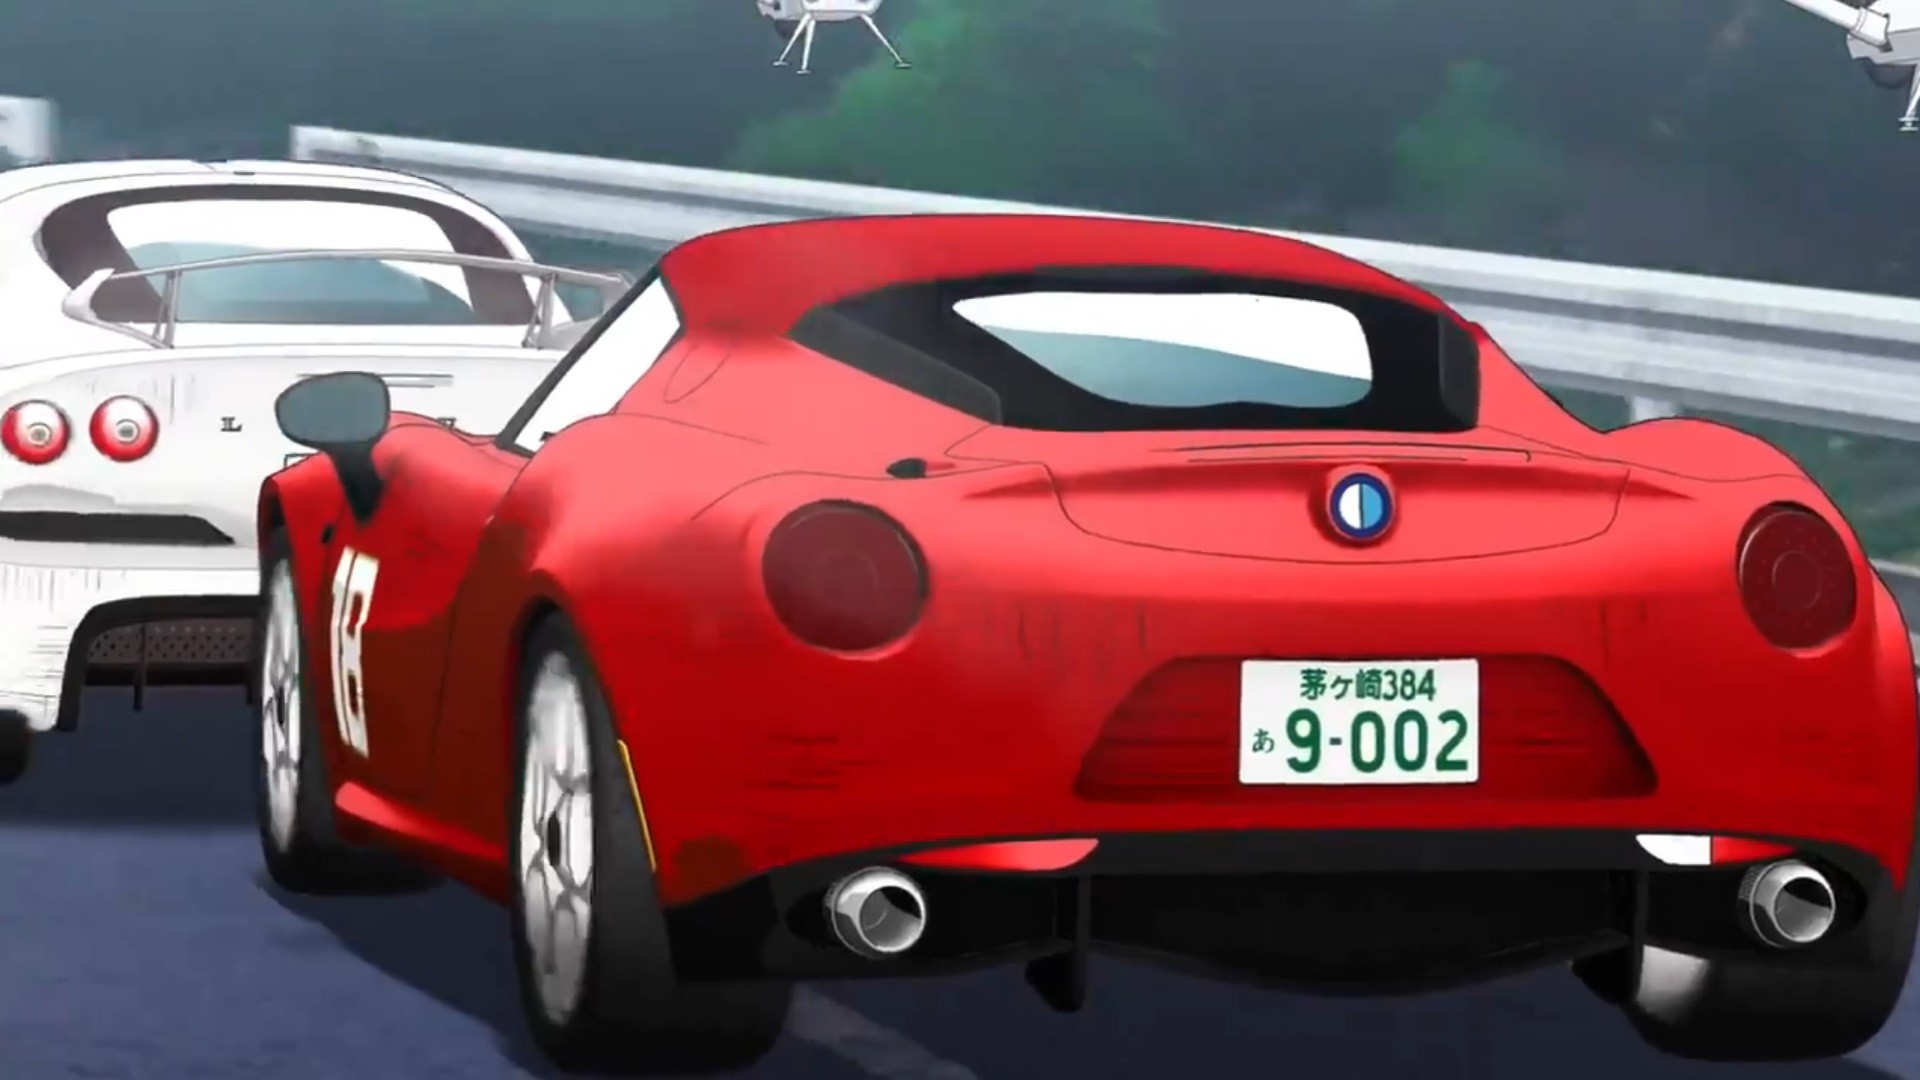 A sequel to Initial D is here, and I'm so hyped for it Anime name: MF, Anime